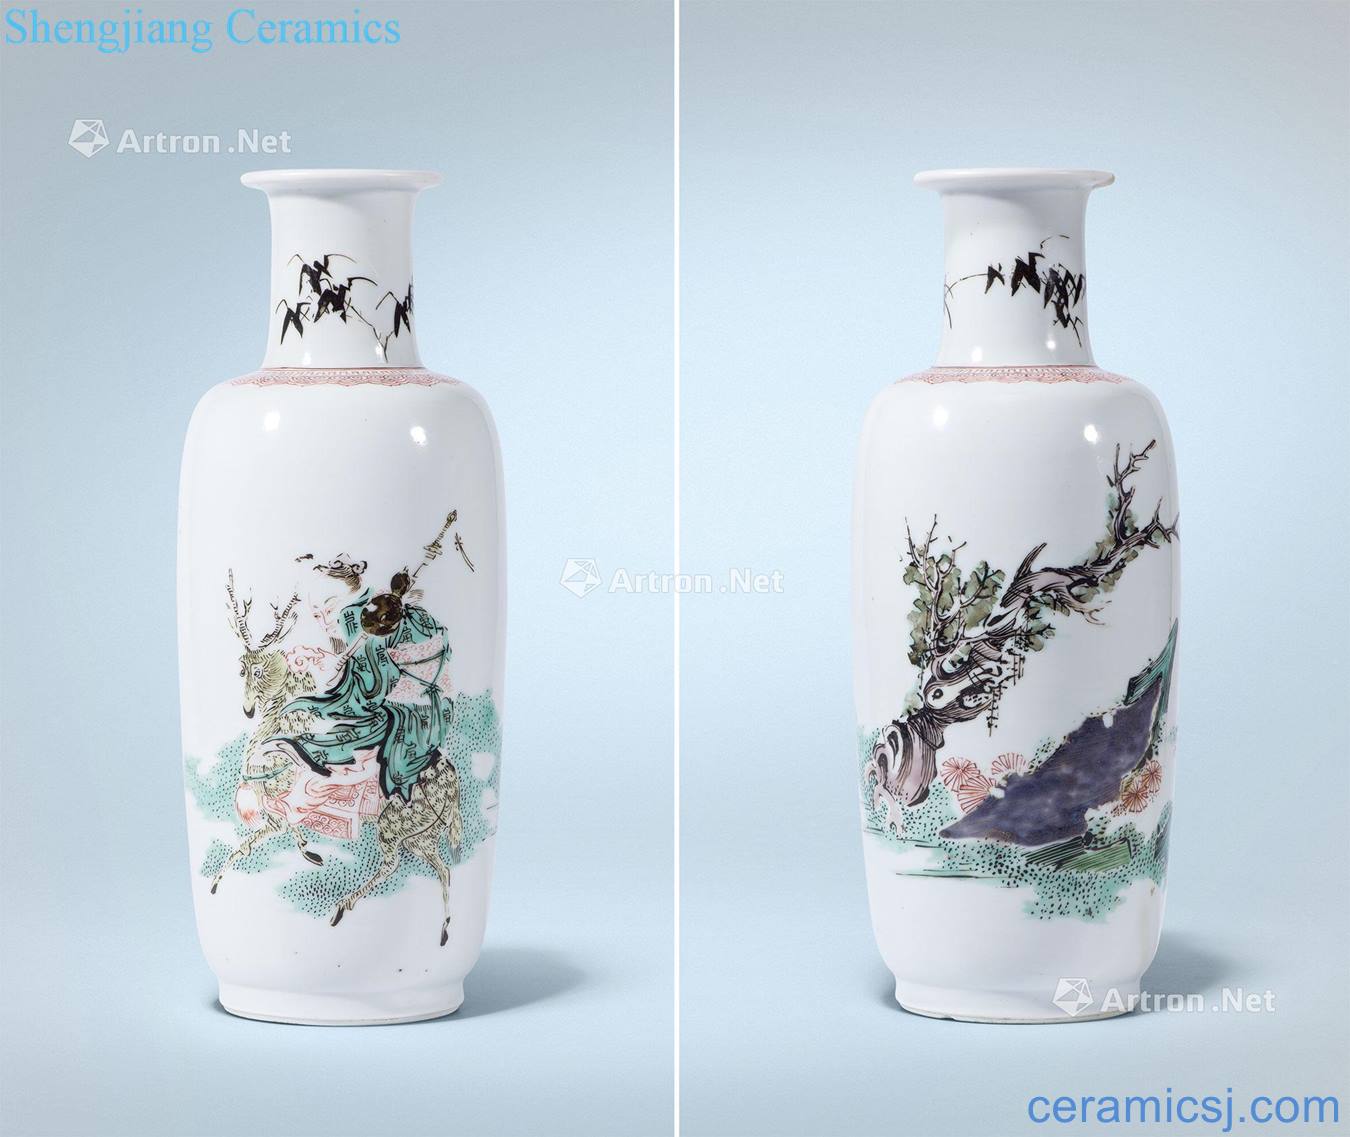 The qing emperor kangxi lines were bottles colorful characters